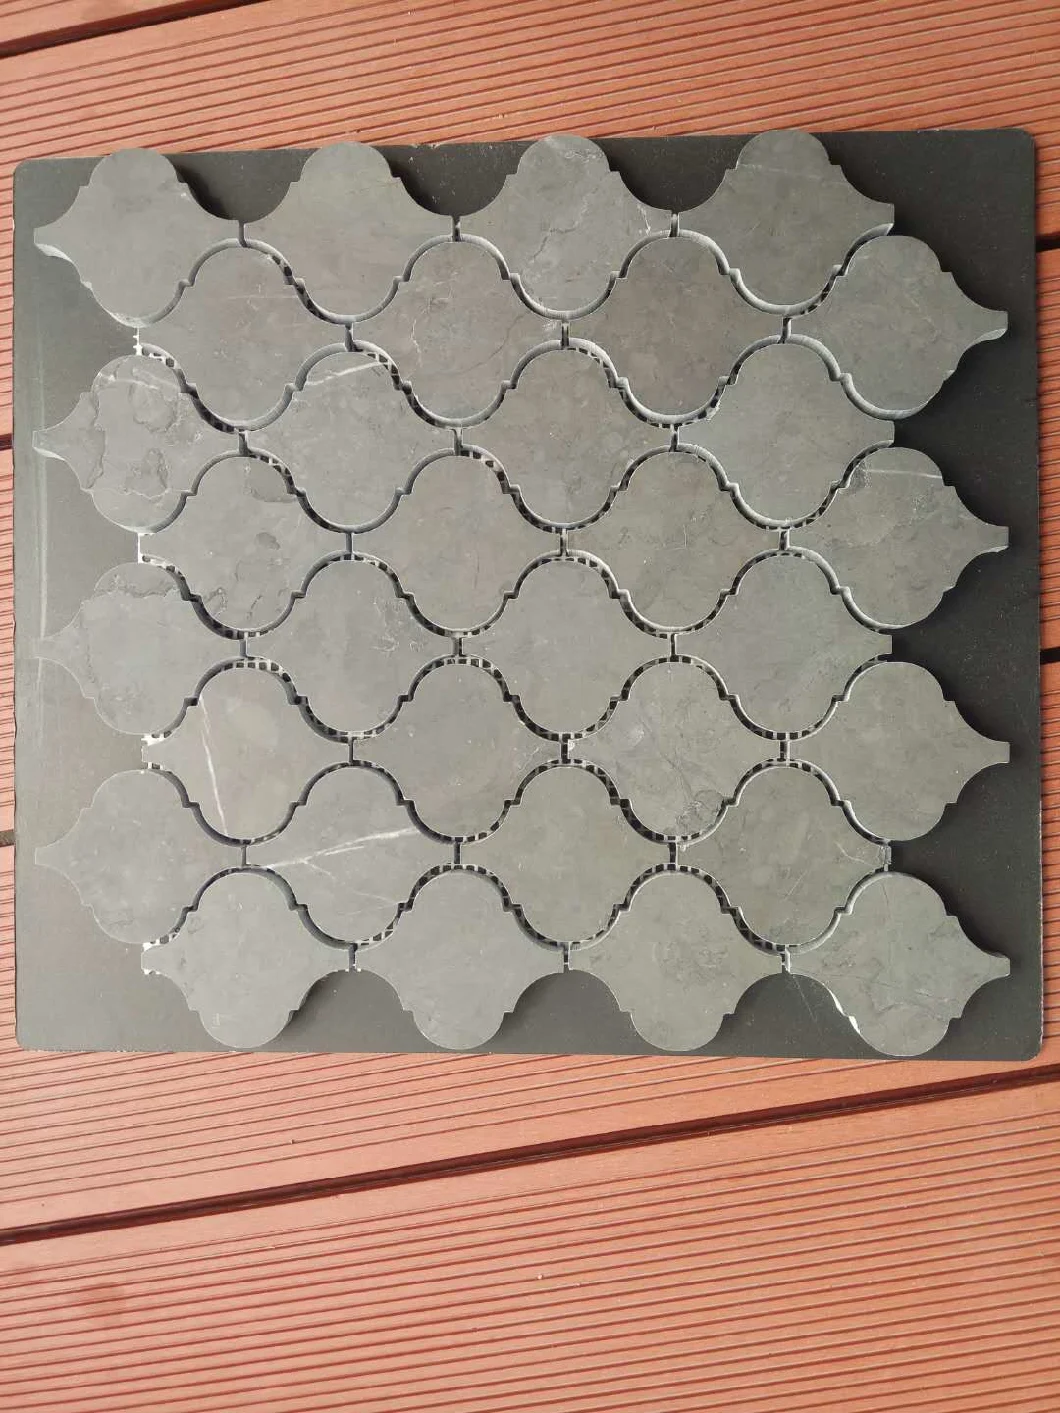 Popular and Cheap Marble Material Mosaic Tile Used for Floorings and Walls